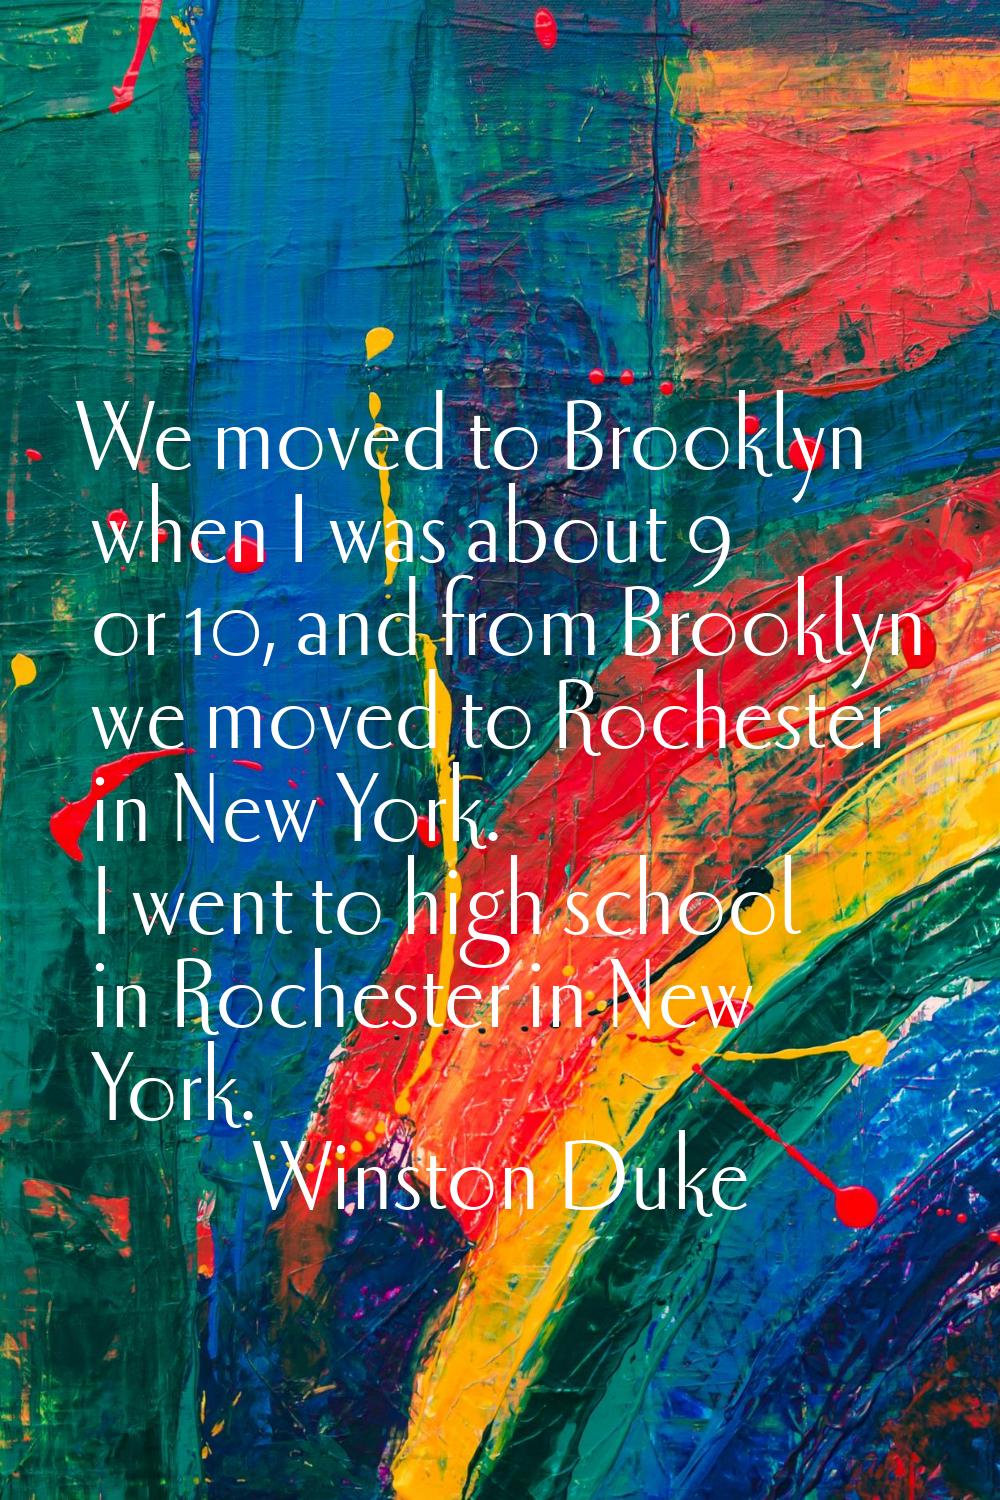 We moved to Brooklyn when I was about 9 or 10, and from Brooklyn we moved to Rochester in New York.